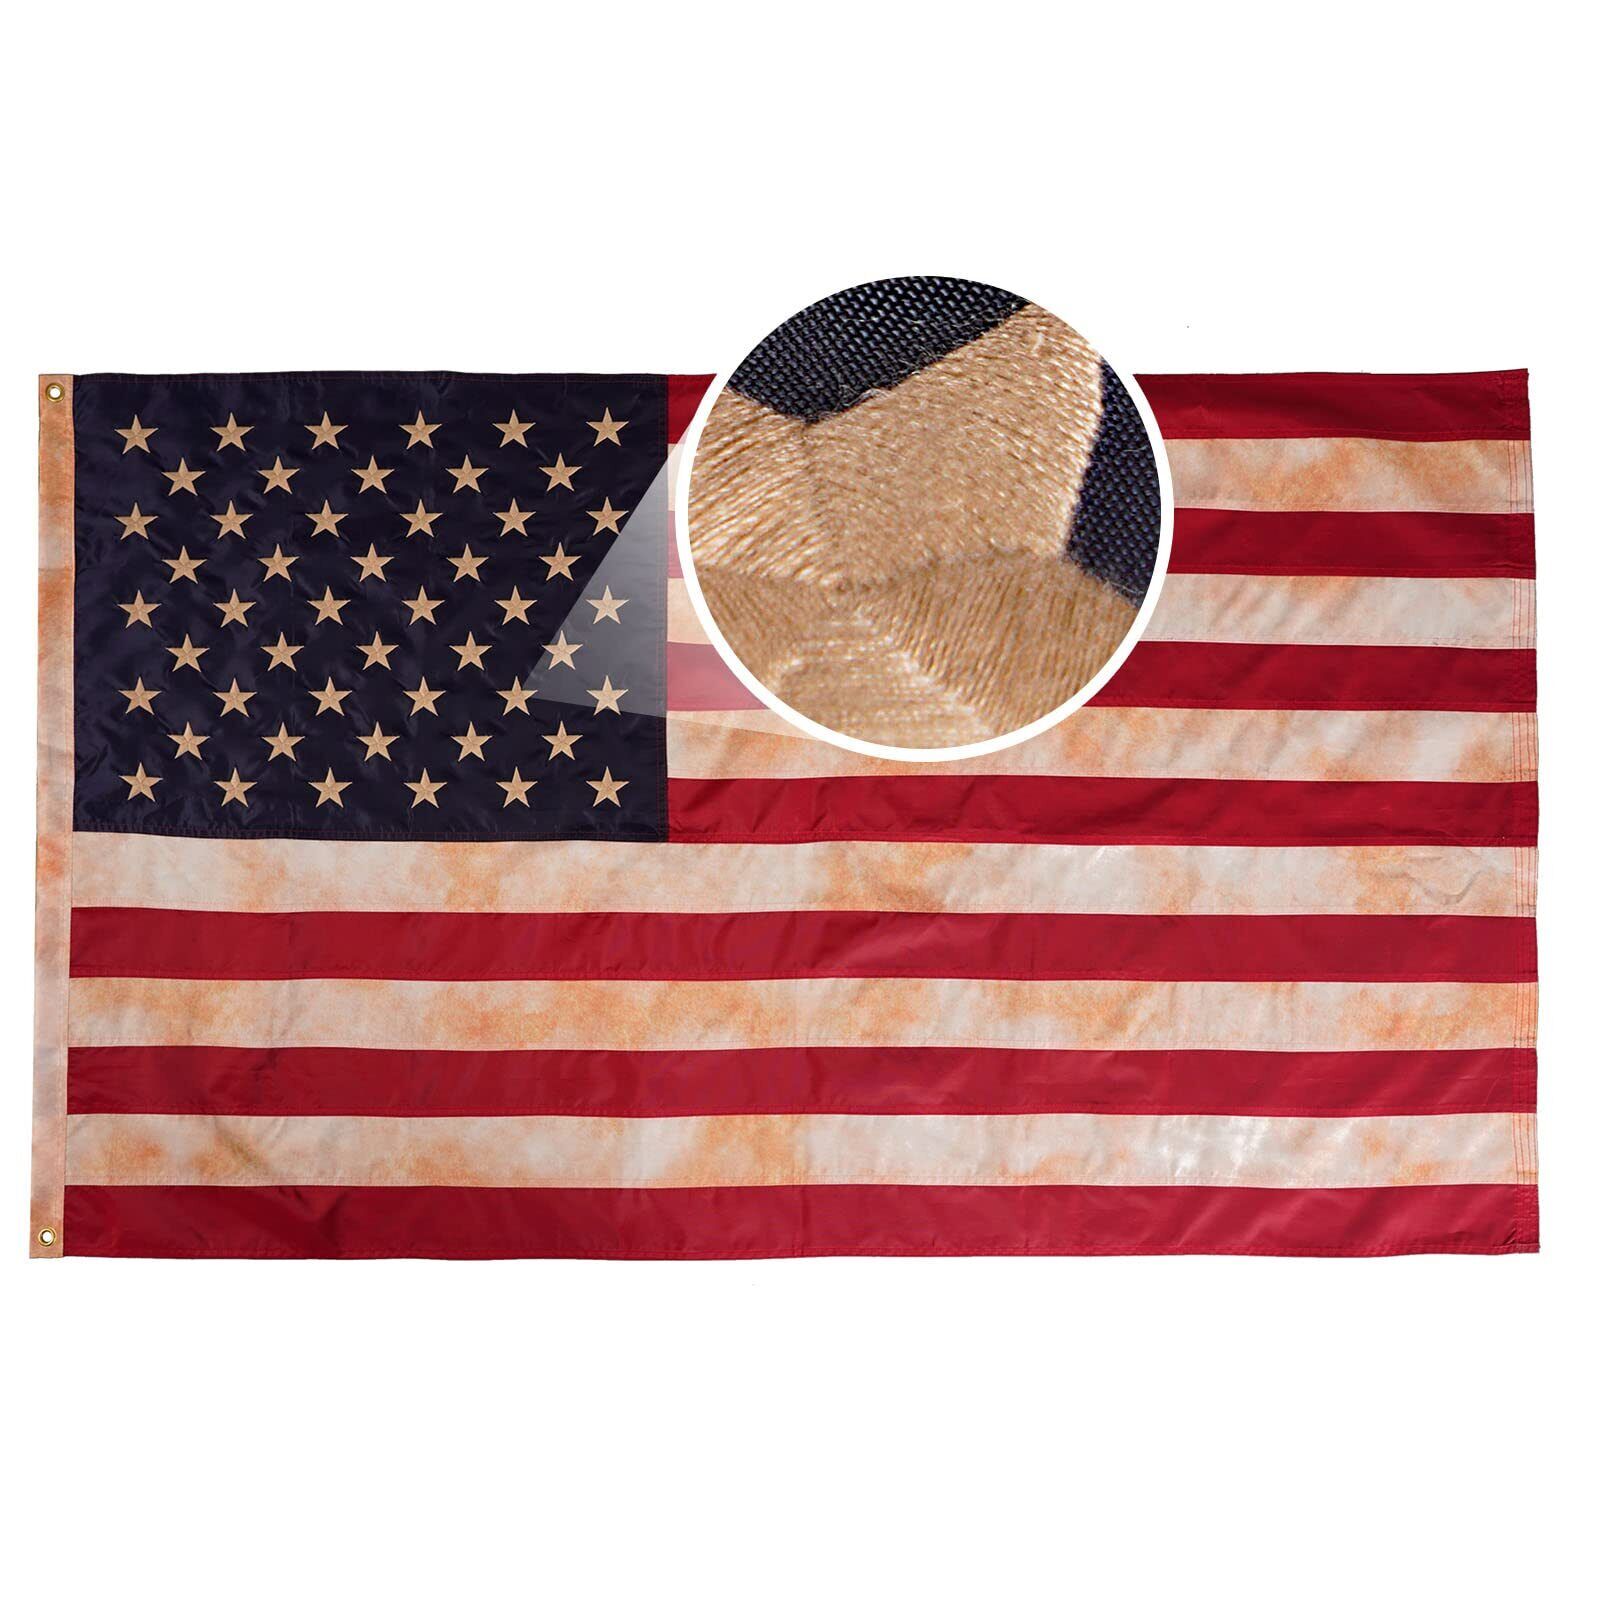 Vintage American Flag 3x5 ft Made in USA, Tea-Stained Embroidered USA Flags F...